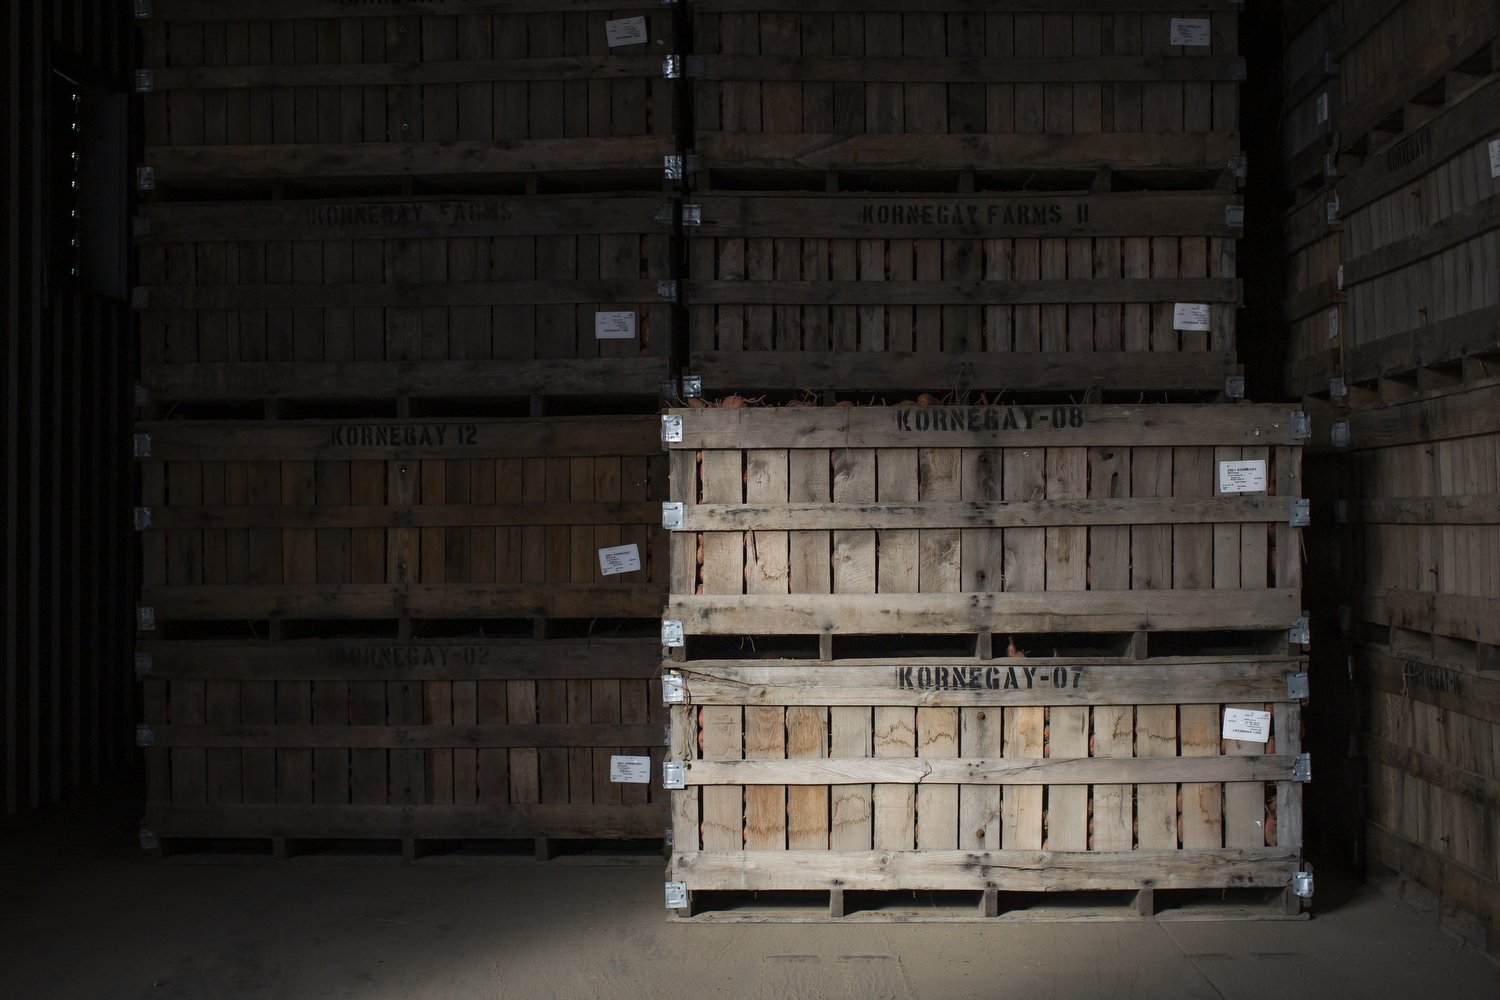  Crates of sweet potatoes fill a curing and storage facility at Kornegay Family Farms and Produce in Princeton, North Caorlina. North Carolina produces 67% of the country’s sweet potatoes and curing the sweet potatoes allows the starch in them to con